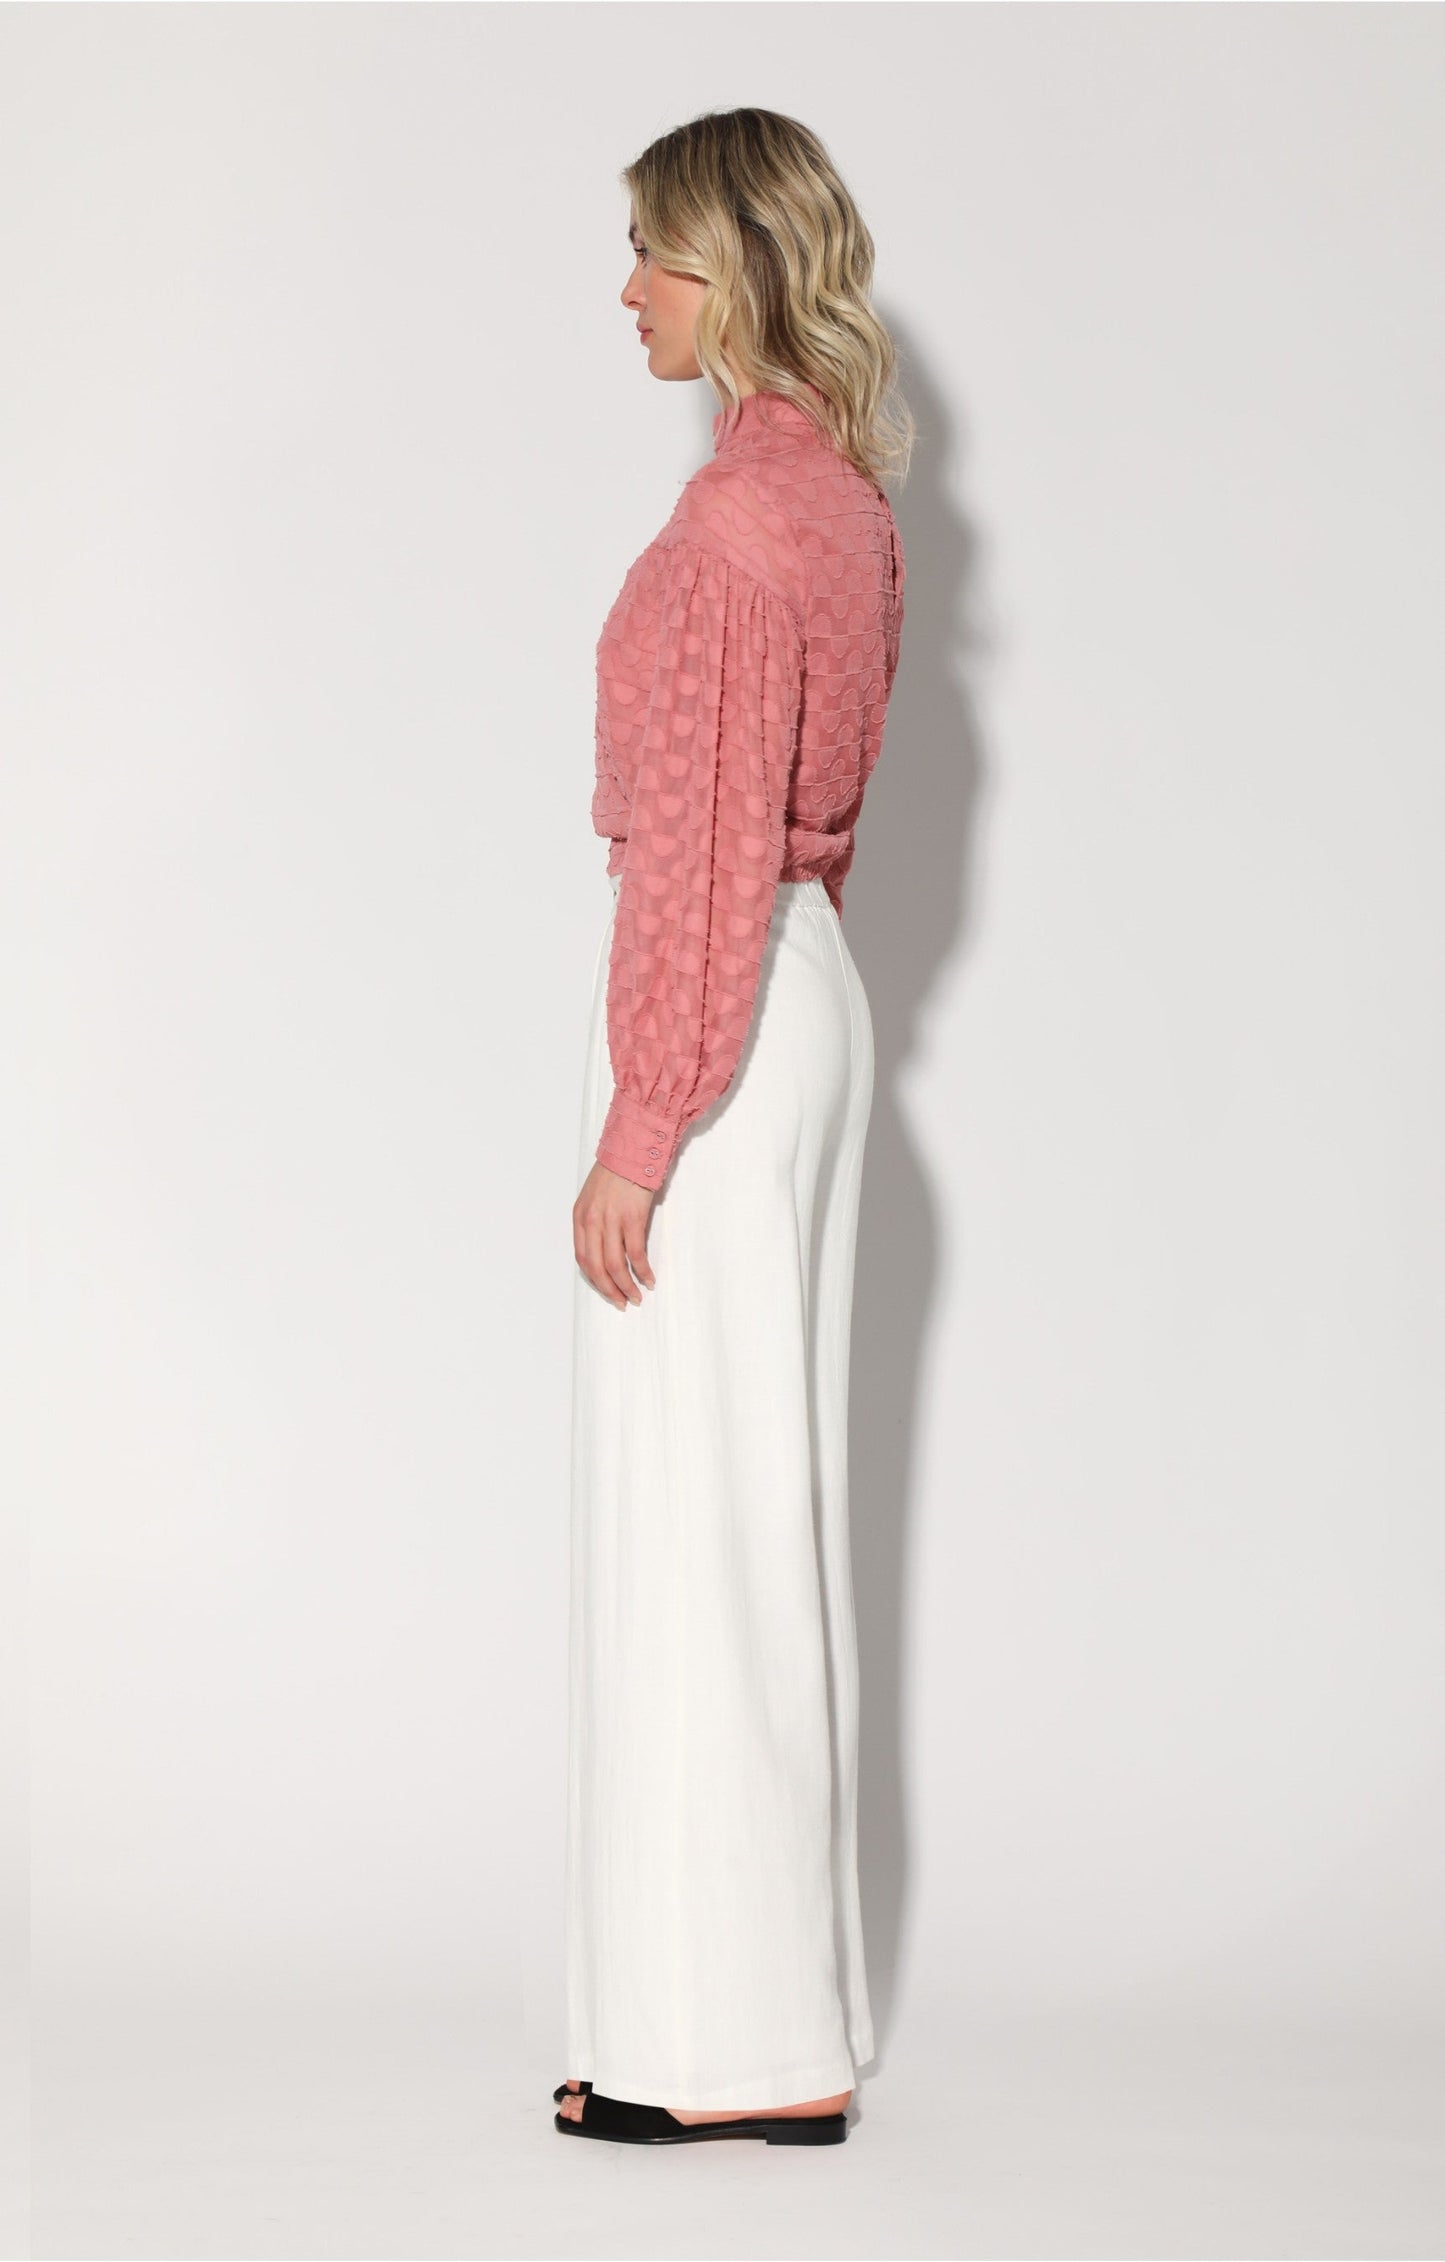 Sandra Top, Coral Blush by Walter Baker